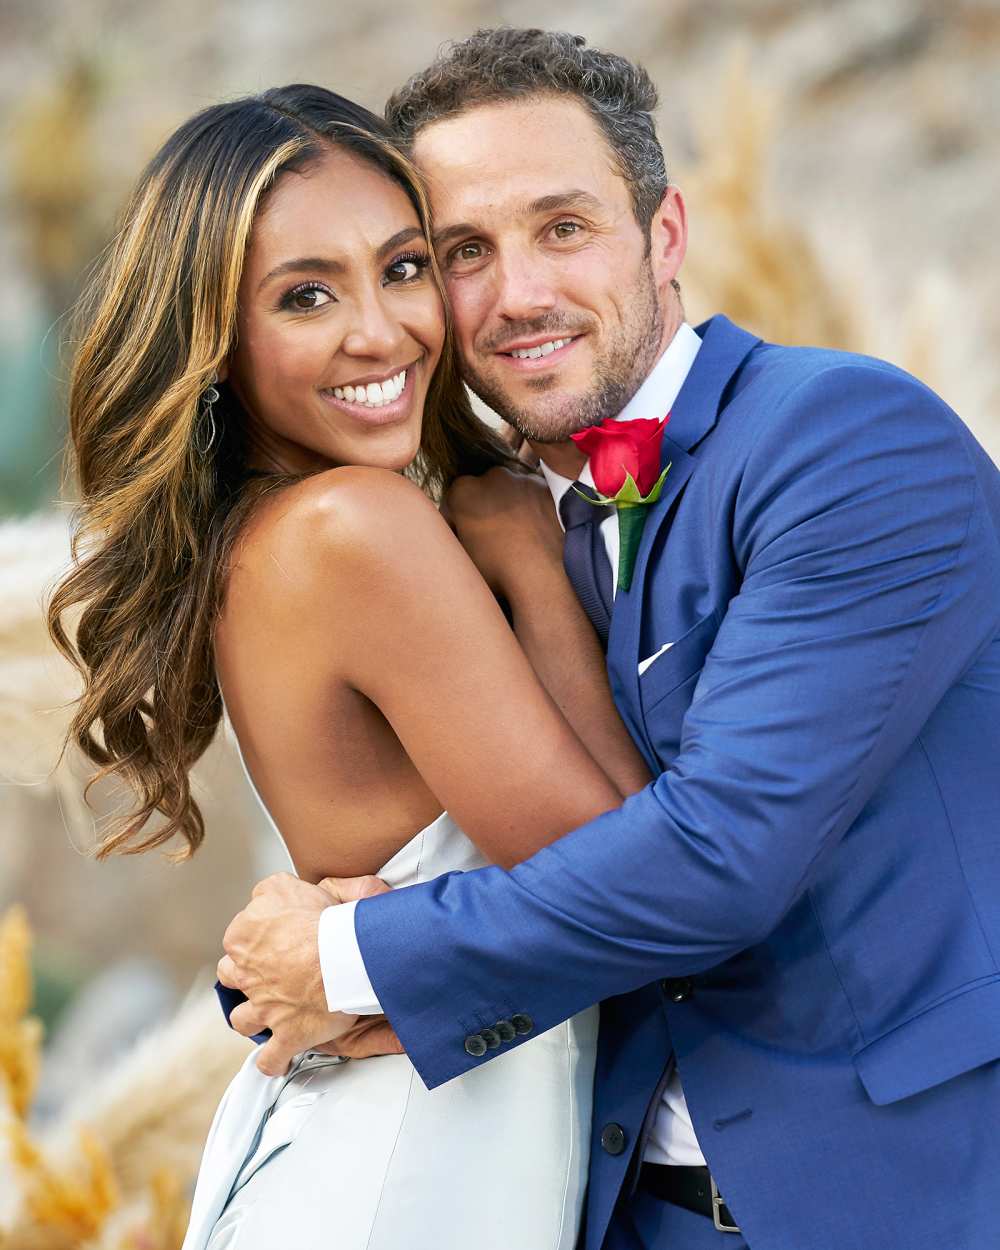 Tayshia Adams Cozies Up to Zac Clark at Home After Emotional Bachelorette Finale